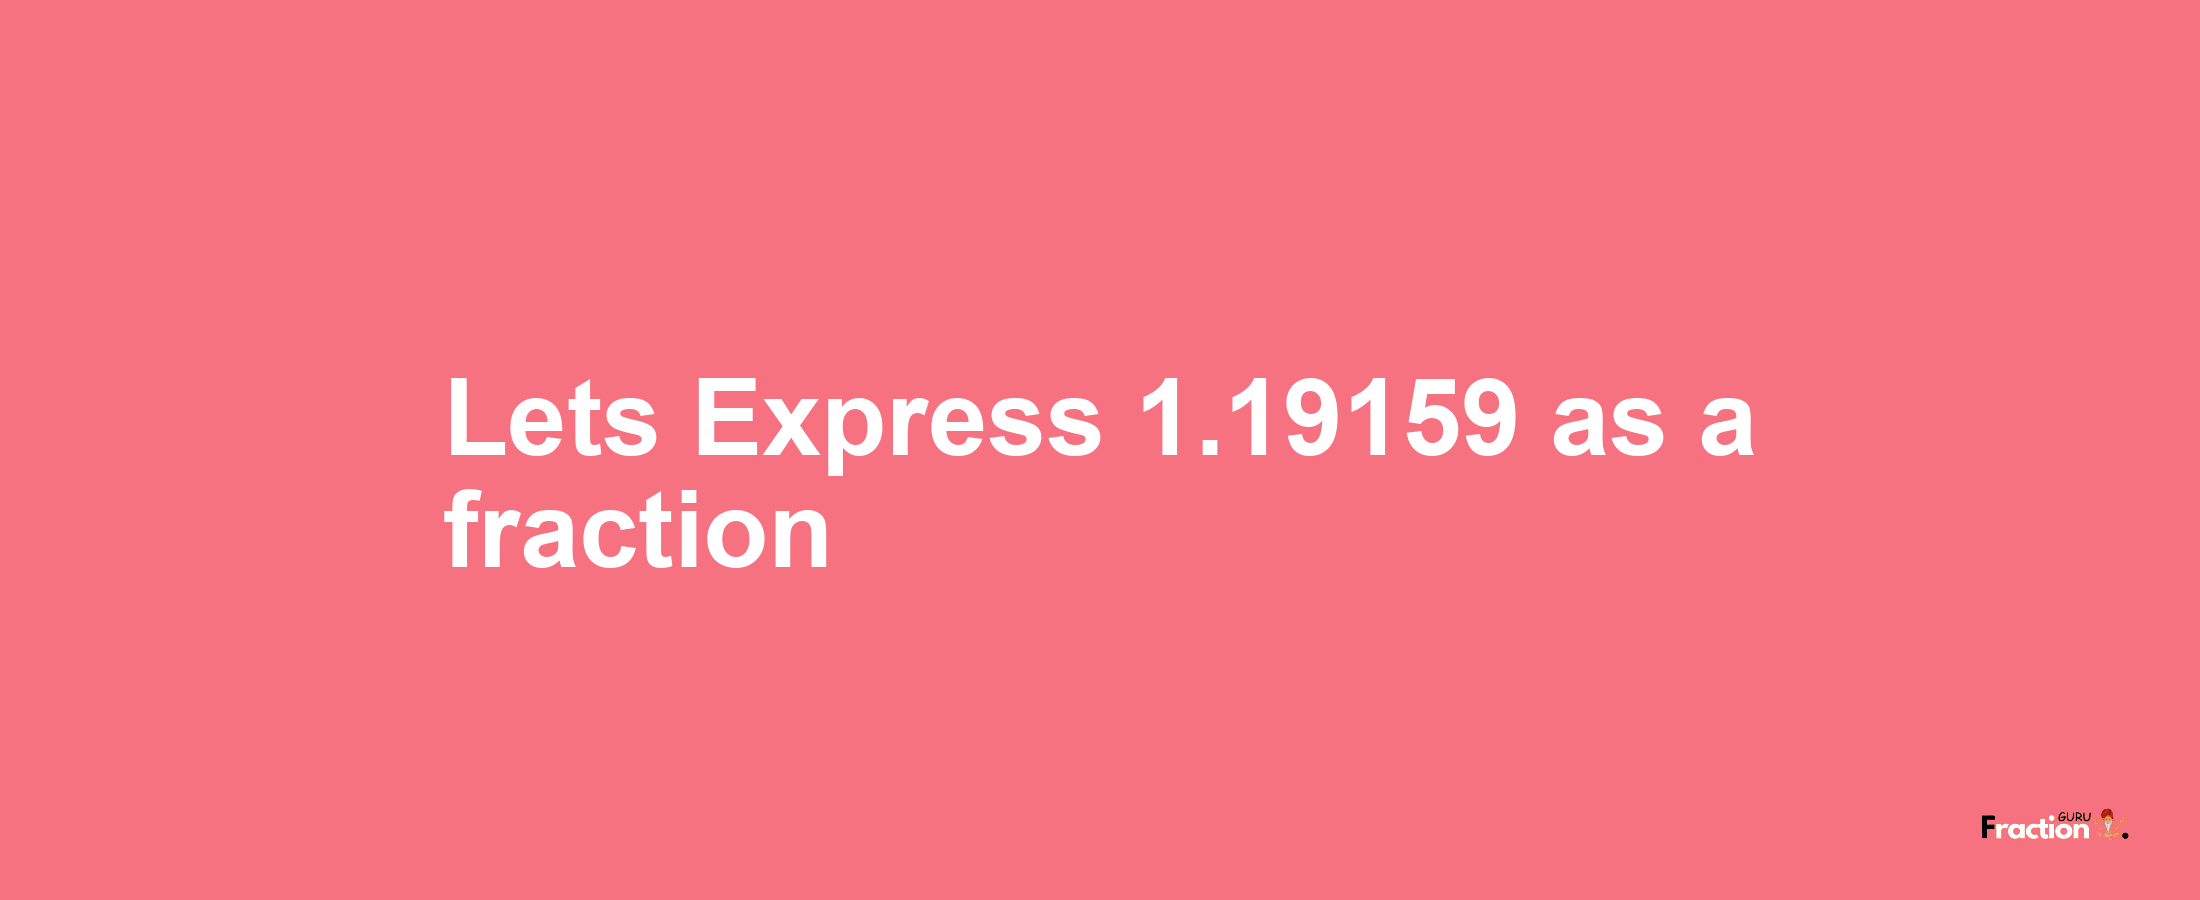 Lets Express 1.19159 as afraction